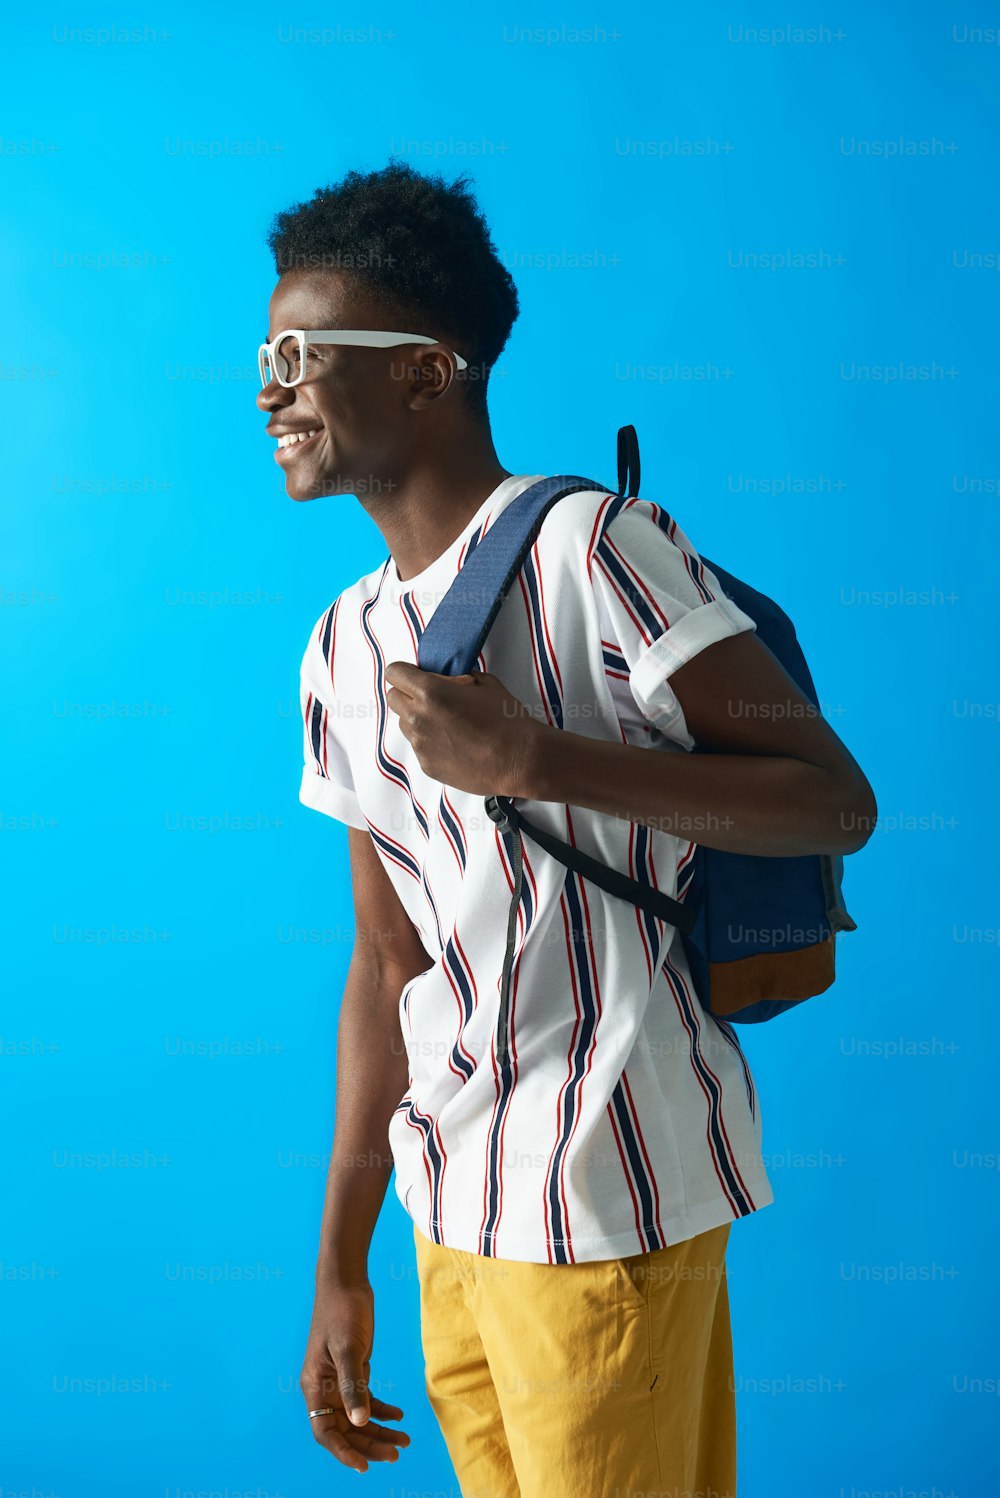 Profile view of young Aframerican student wearing white glasses and striped t-shirt. He smiling while standing on blue background